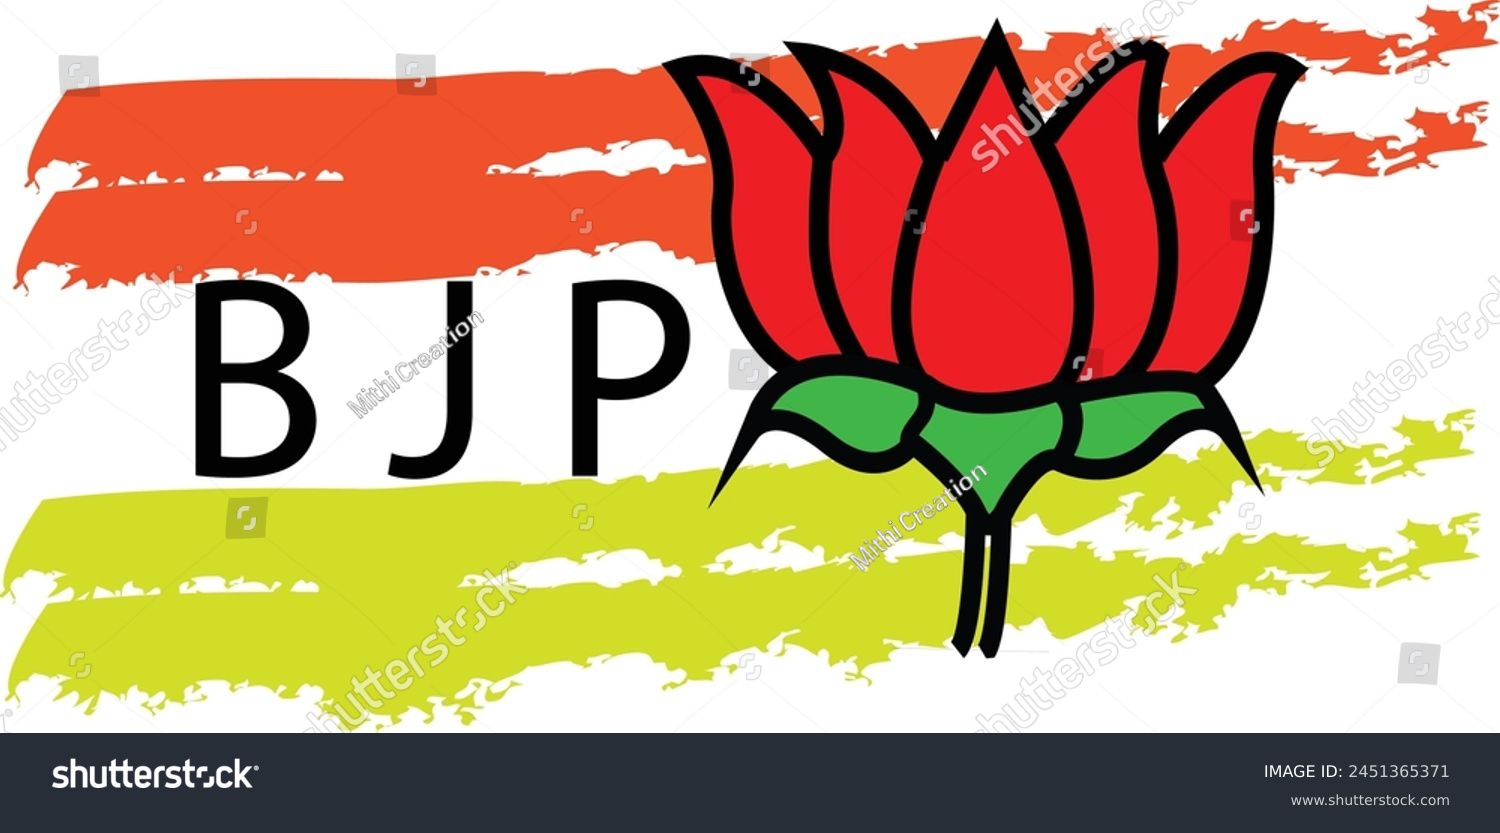 SVG of BJP Lotus icon vector stock photo svg